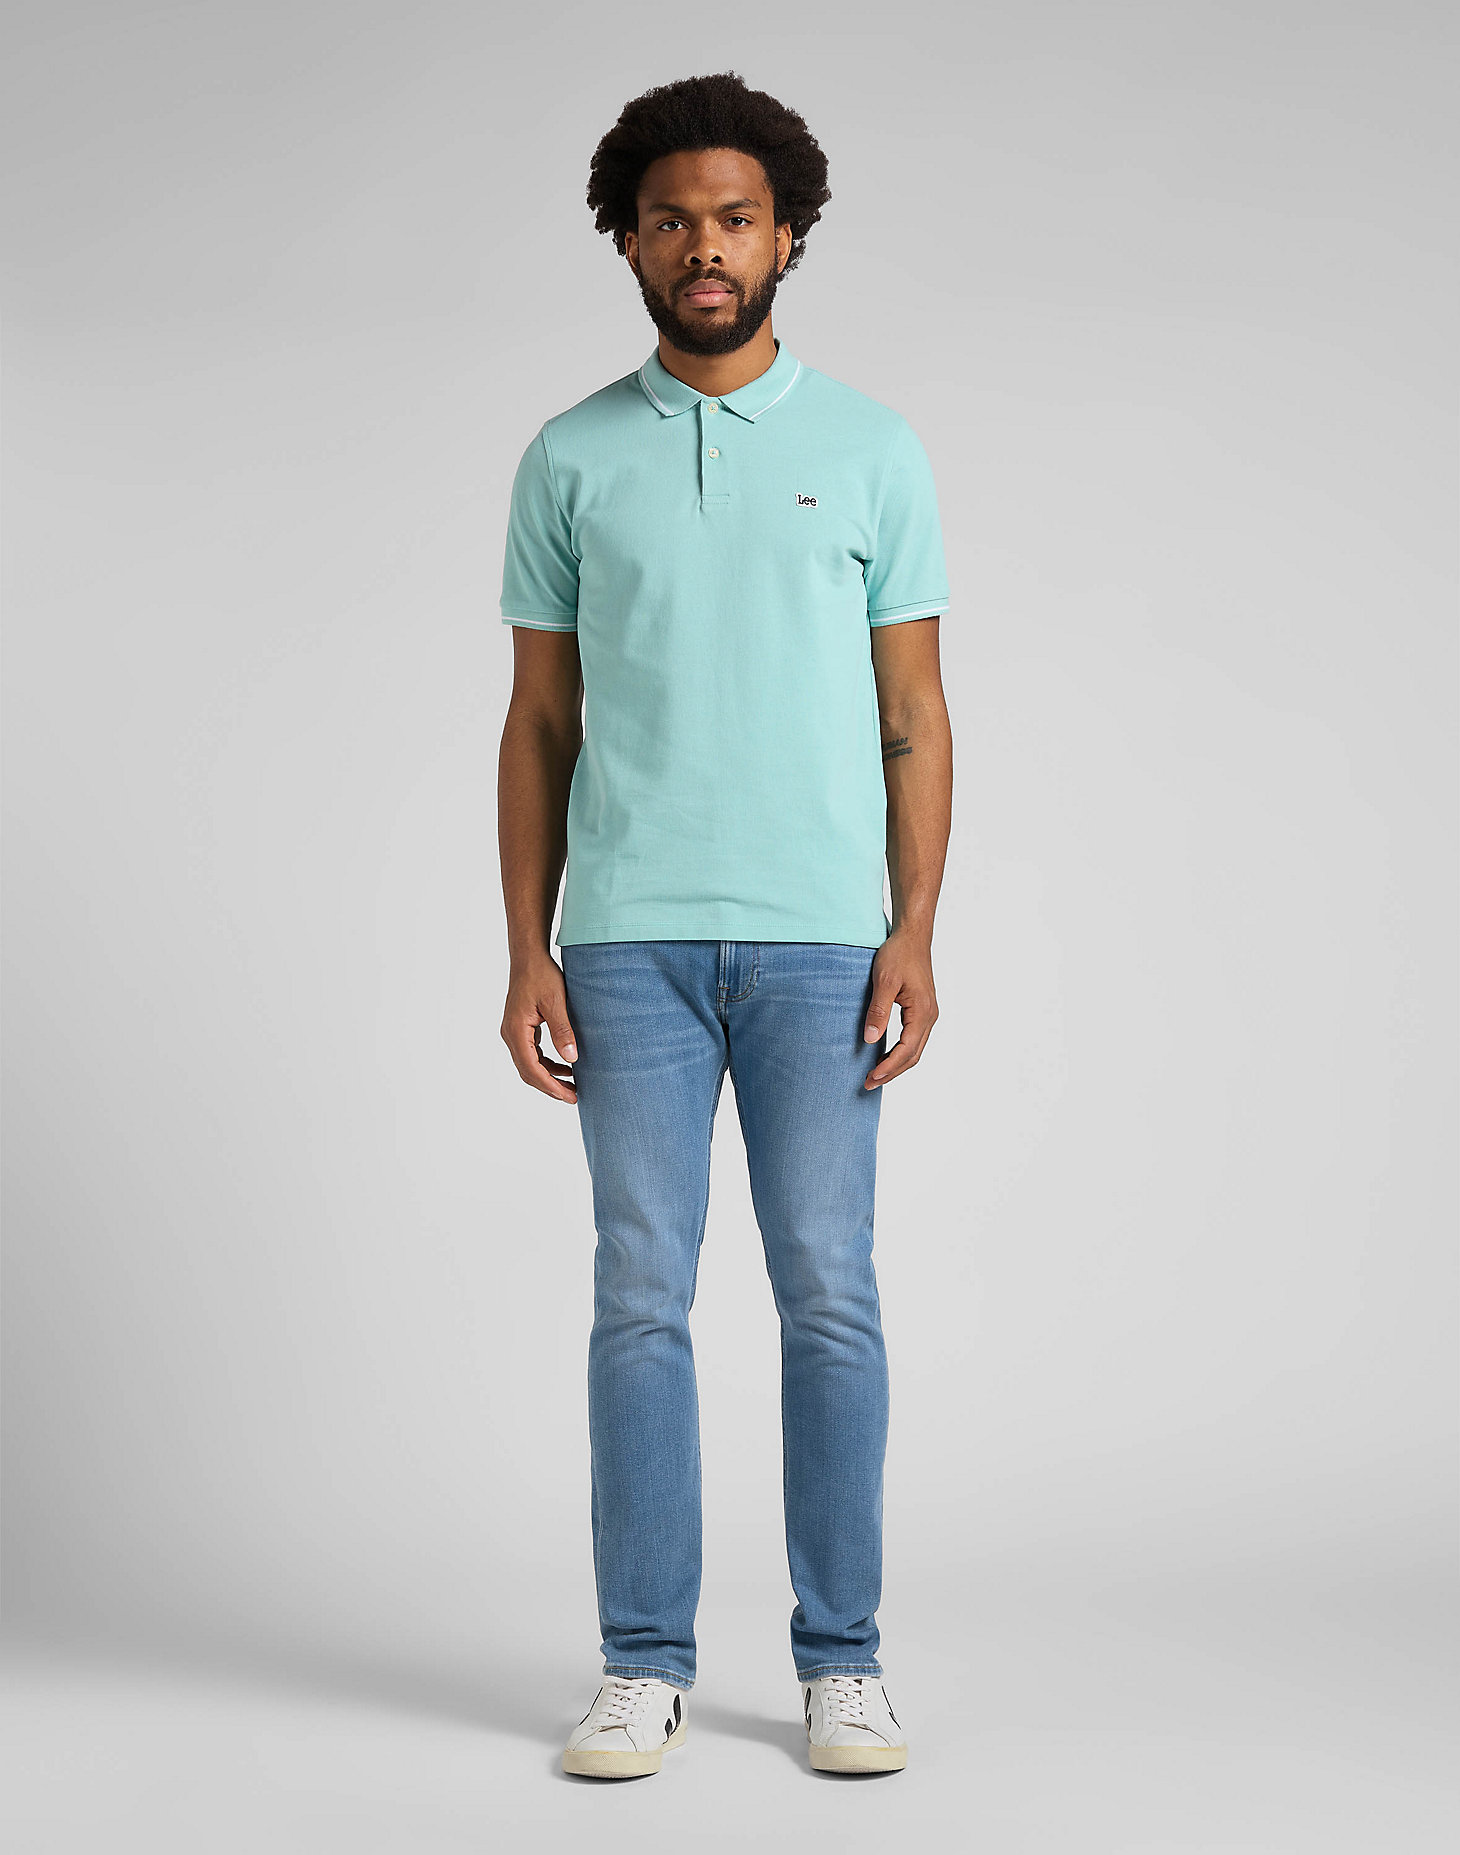 Pique Polo in Mint Blue alternative view 3